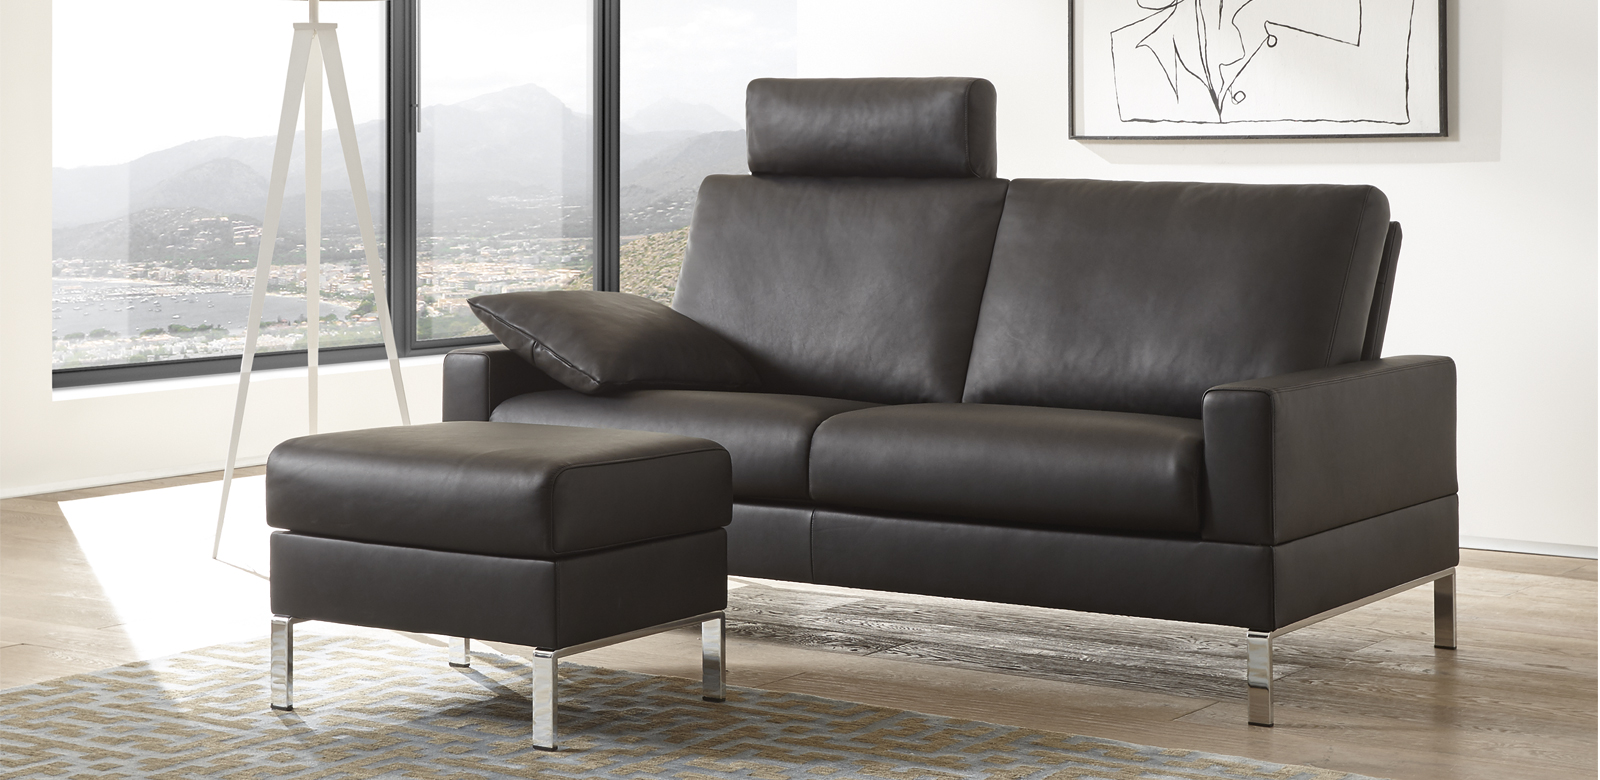 Design leather sofa Monza - the elegant leather sofa has a very special design language: the Bauhaus style is unmistakable here, including a high level of comfort thanks to the proven Erpo seat and backrest mechanism. The series scores with its clear, cubist design claim and is ideal as lounge furniture.